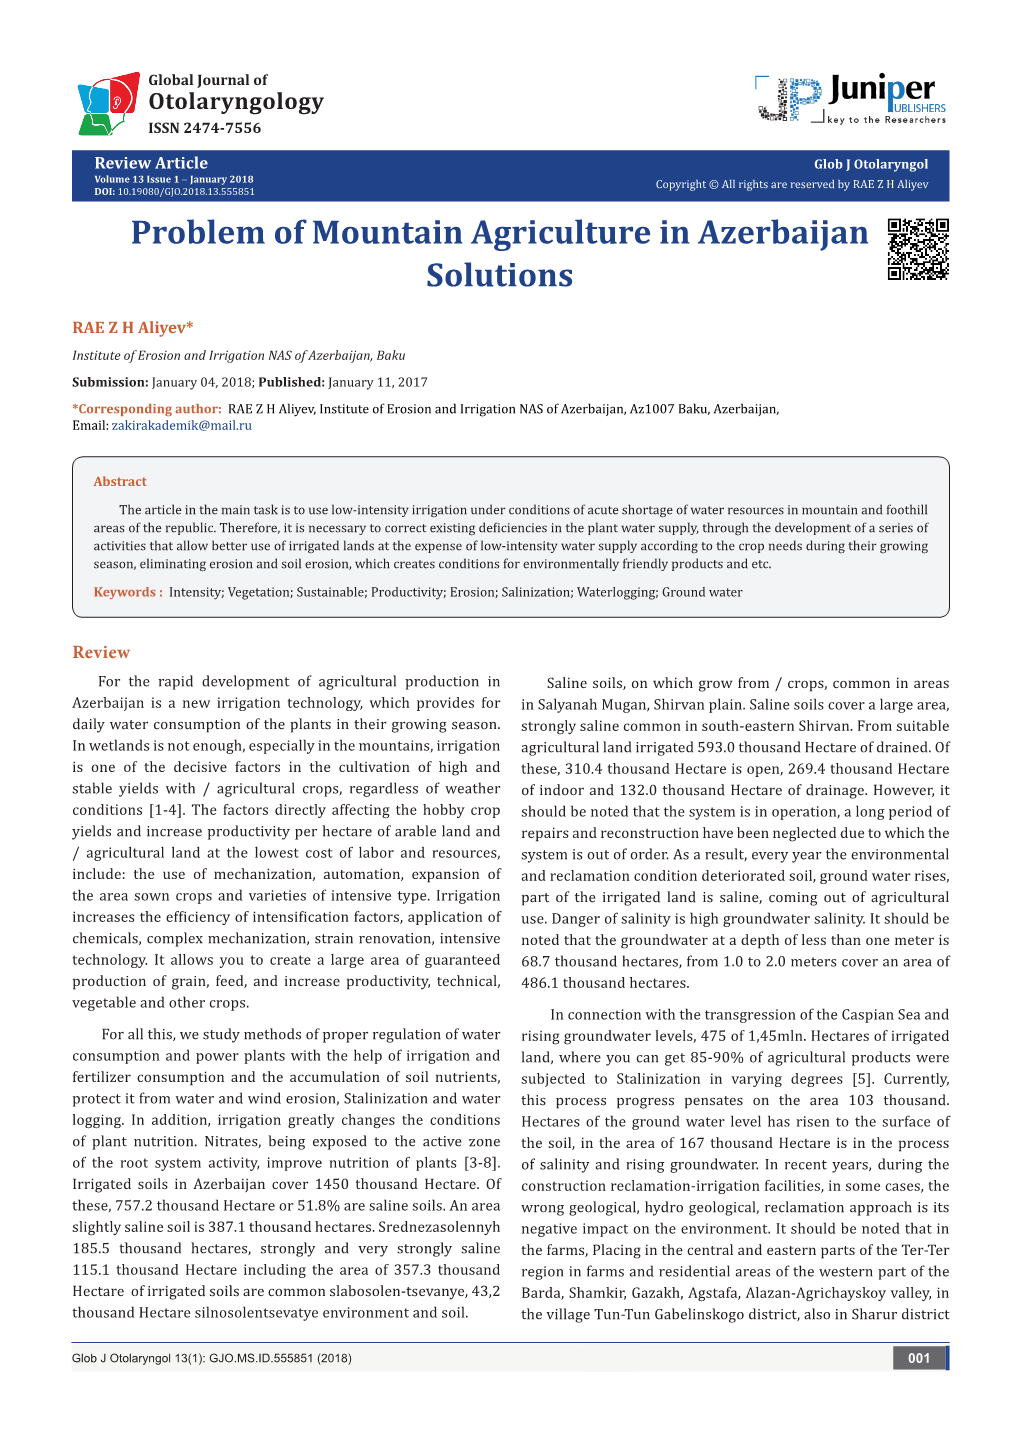 Problem of Mountain Agriculture in Azerbaijan Solutions